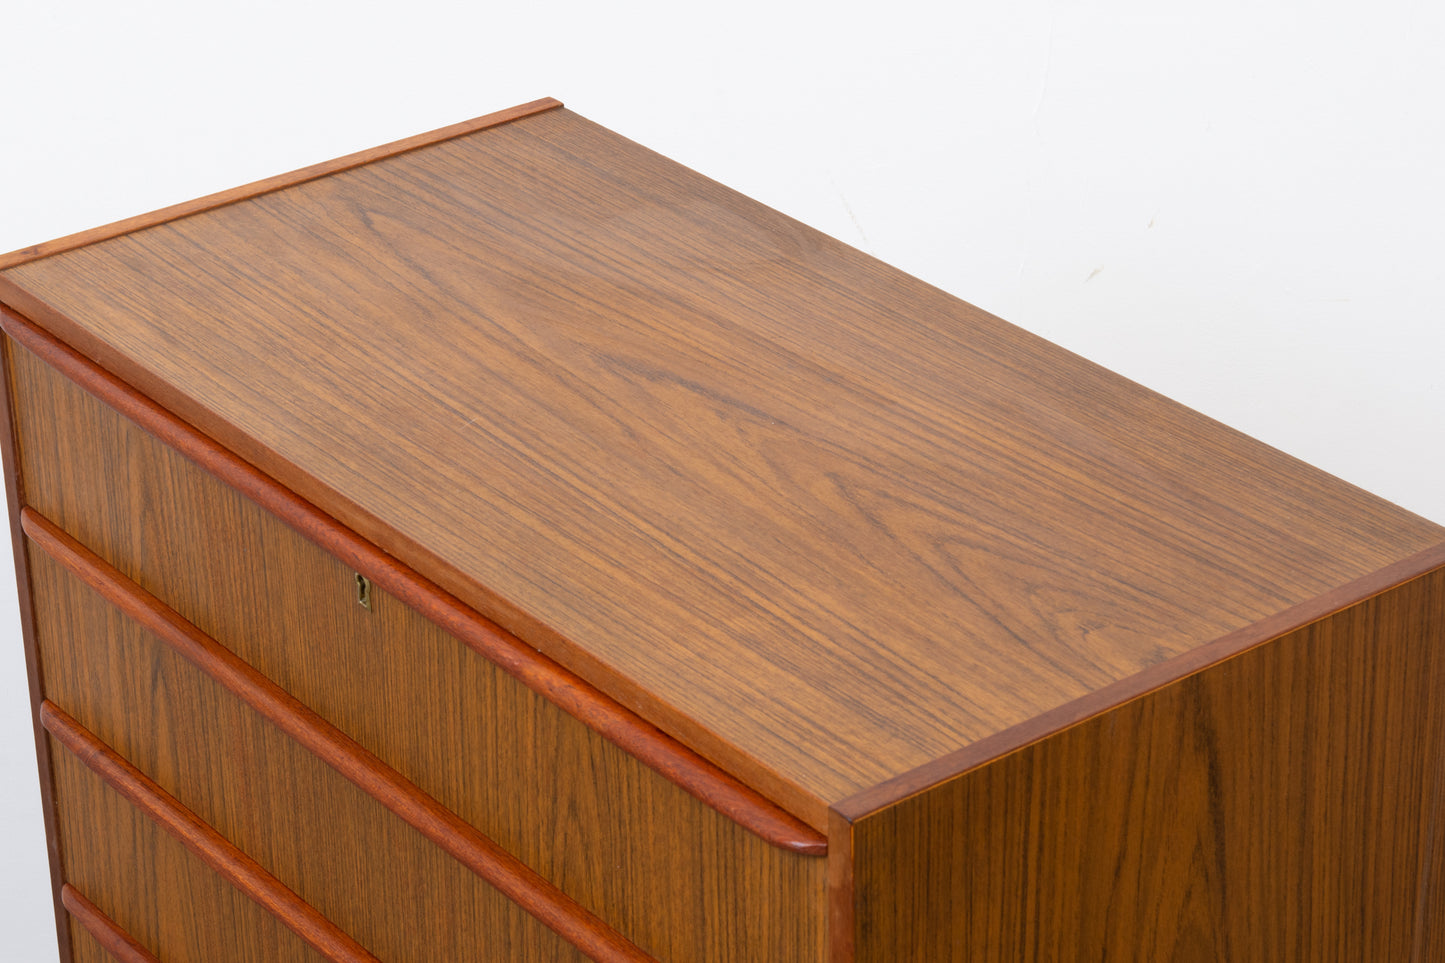 1960s rosewood + teak chest of drawers